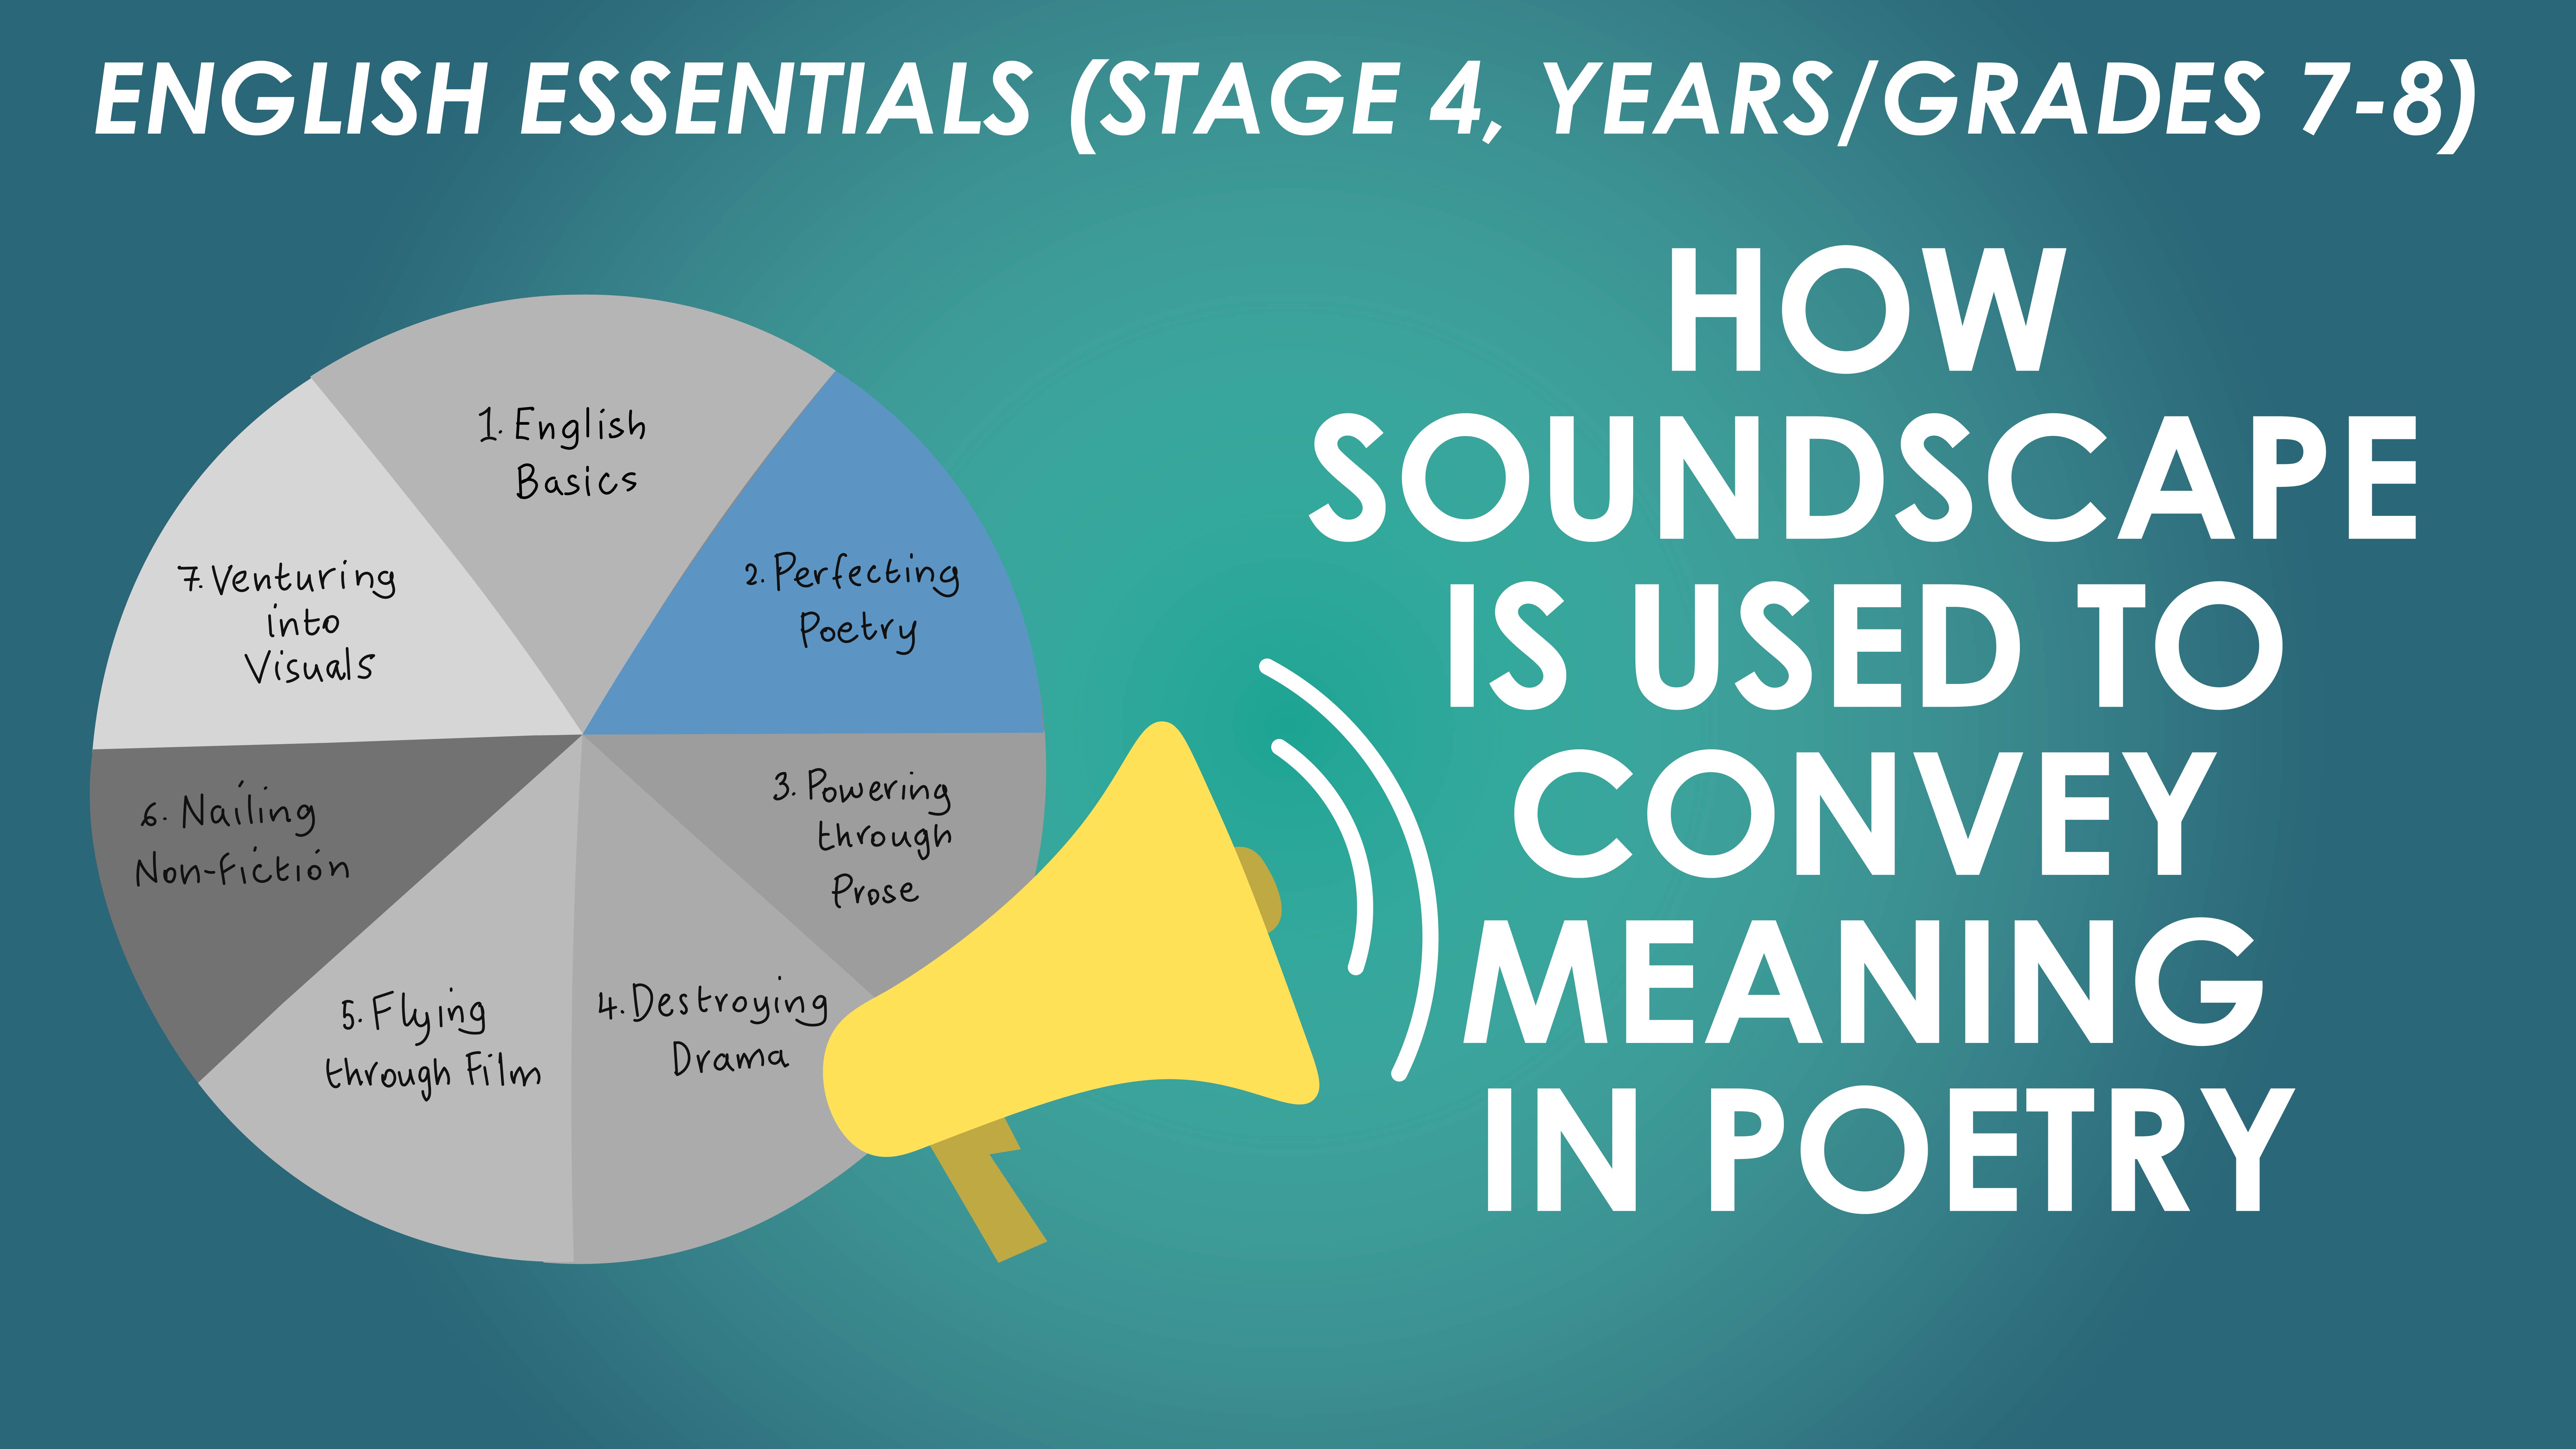 English Essentials – Perfecting Poetry – How Soundscape is used to Convey Meaning in Poetry (Stage 4, Years/Grades 7-8)